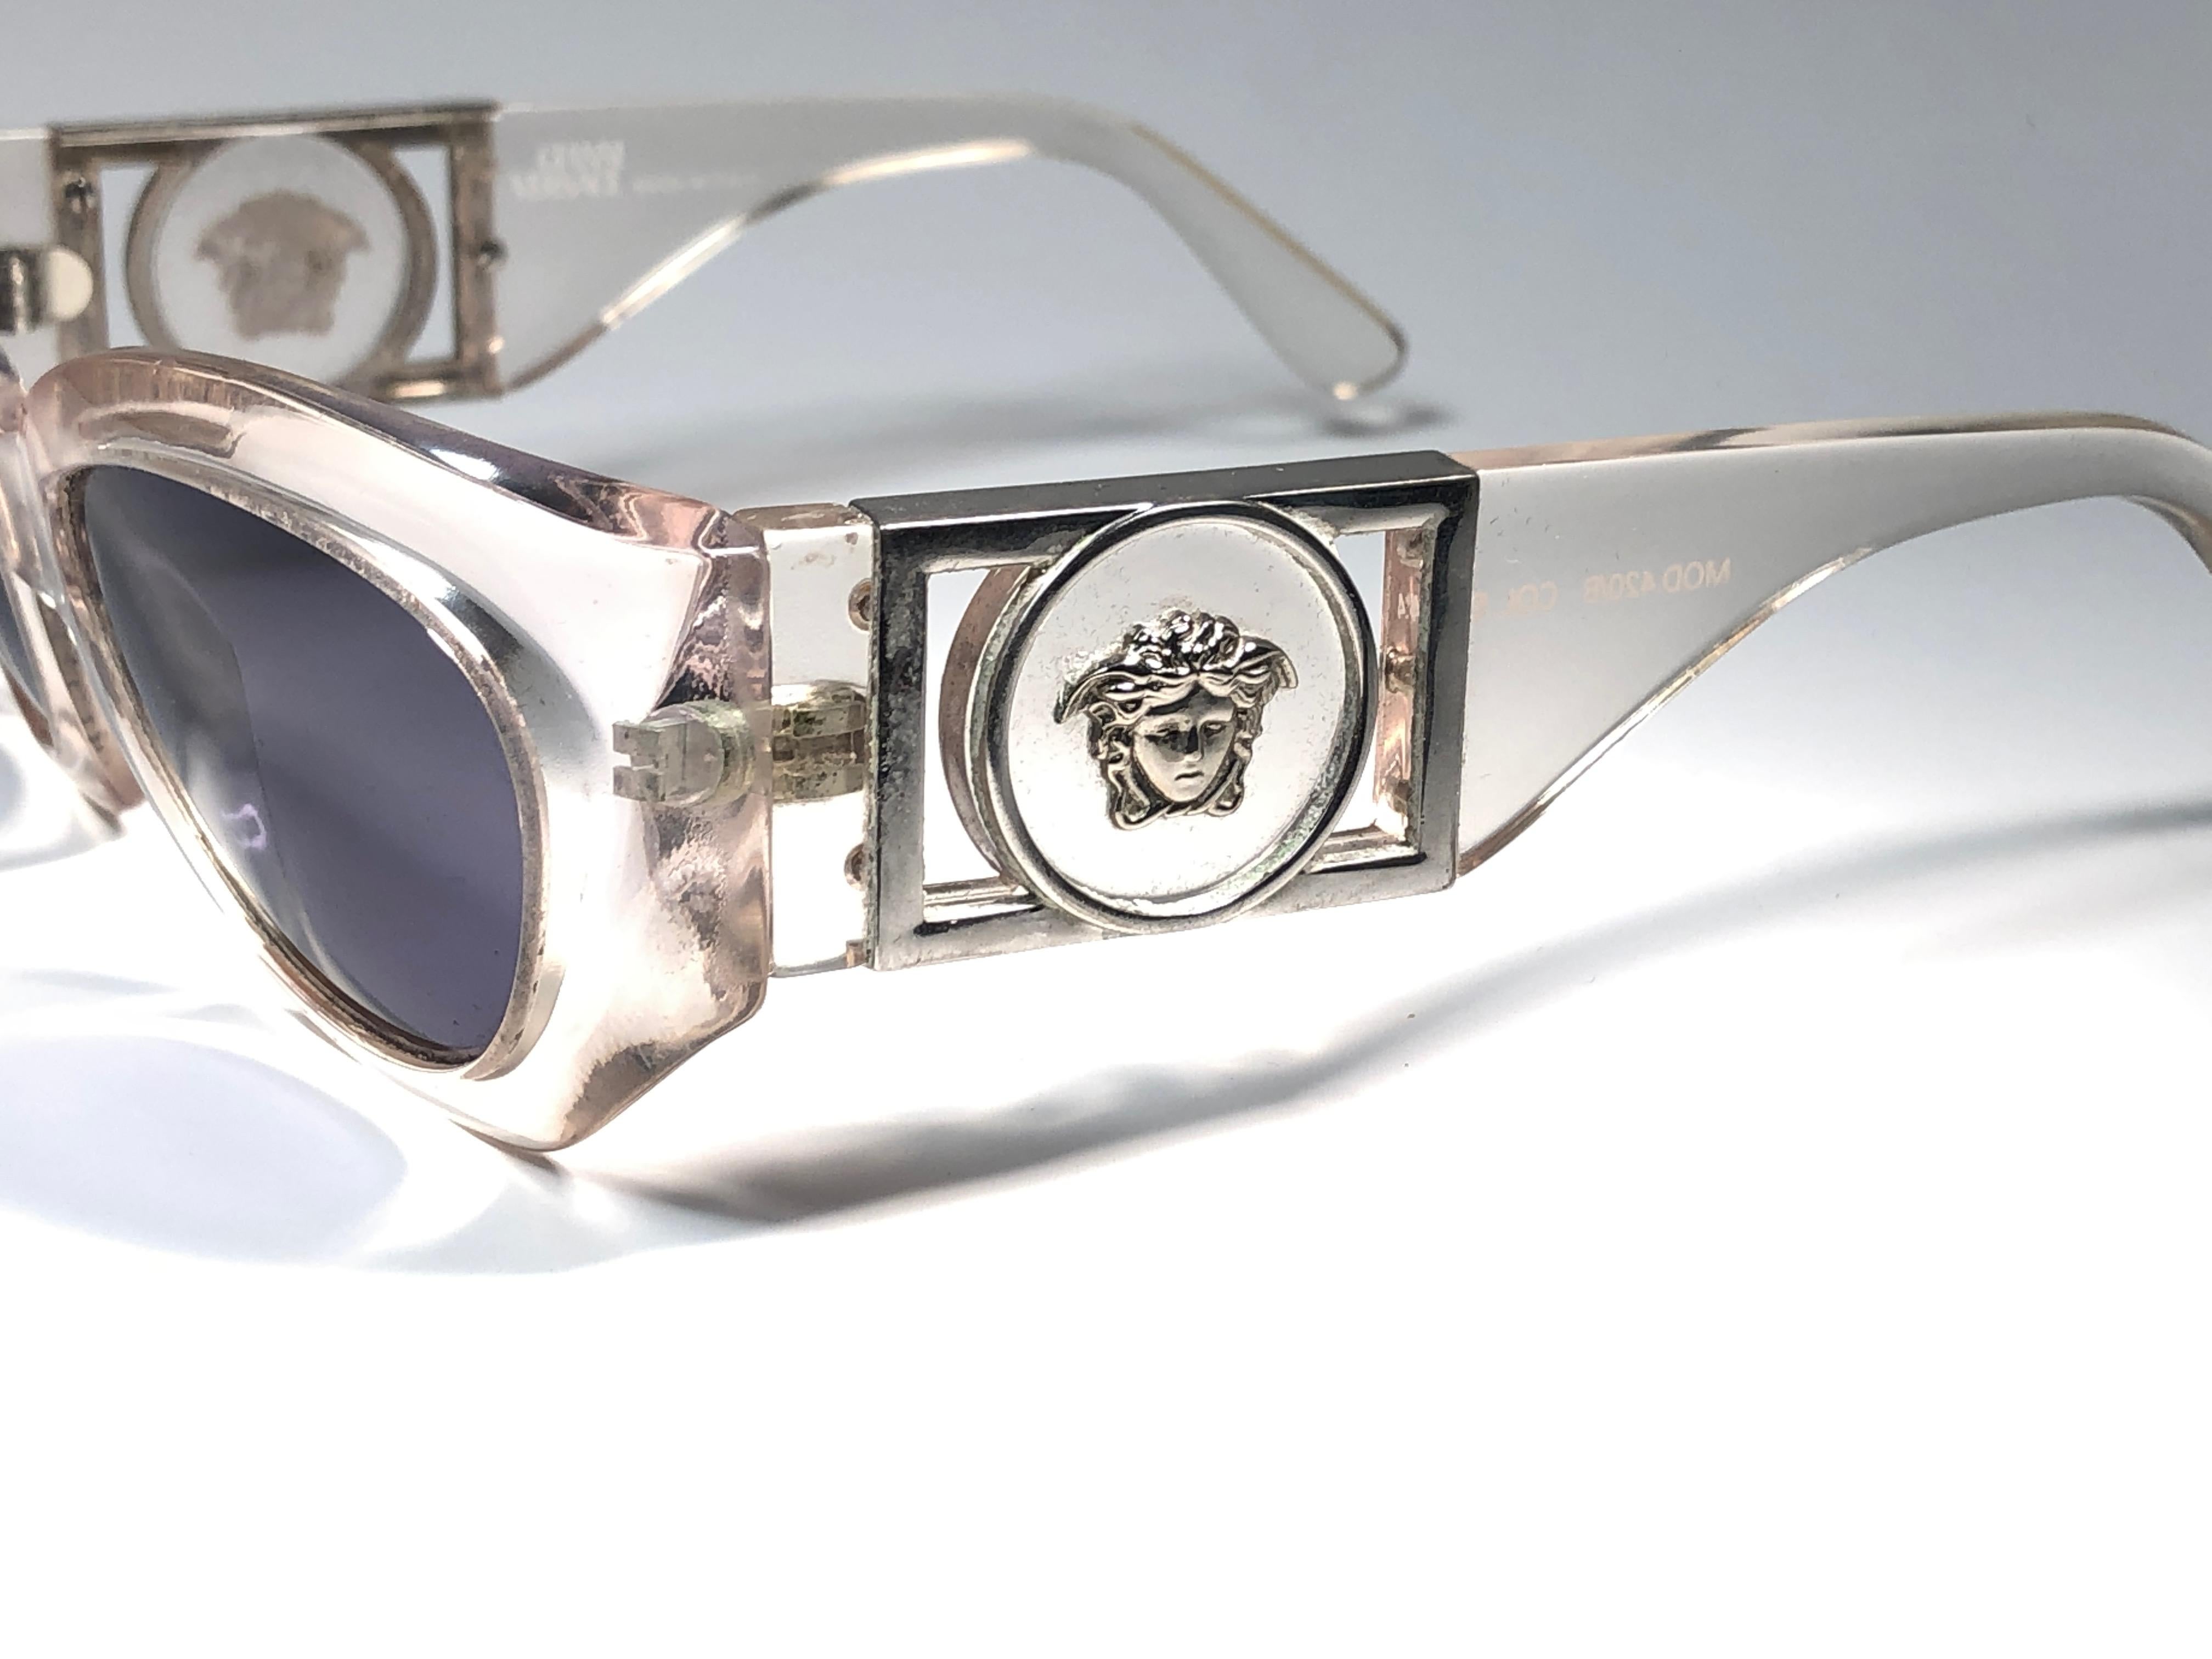 Vintage Gianni Versace Translucent 420B Sunglasses 1990's Made in Italy In Excellent Condition For Sale In Baleares, Baleares